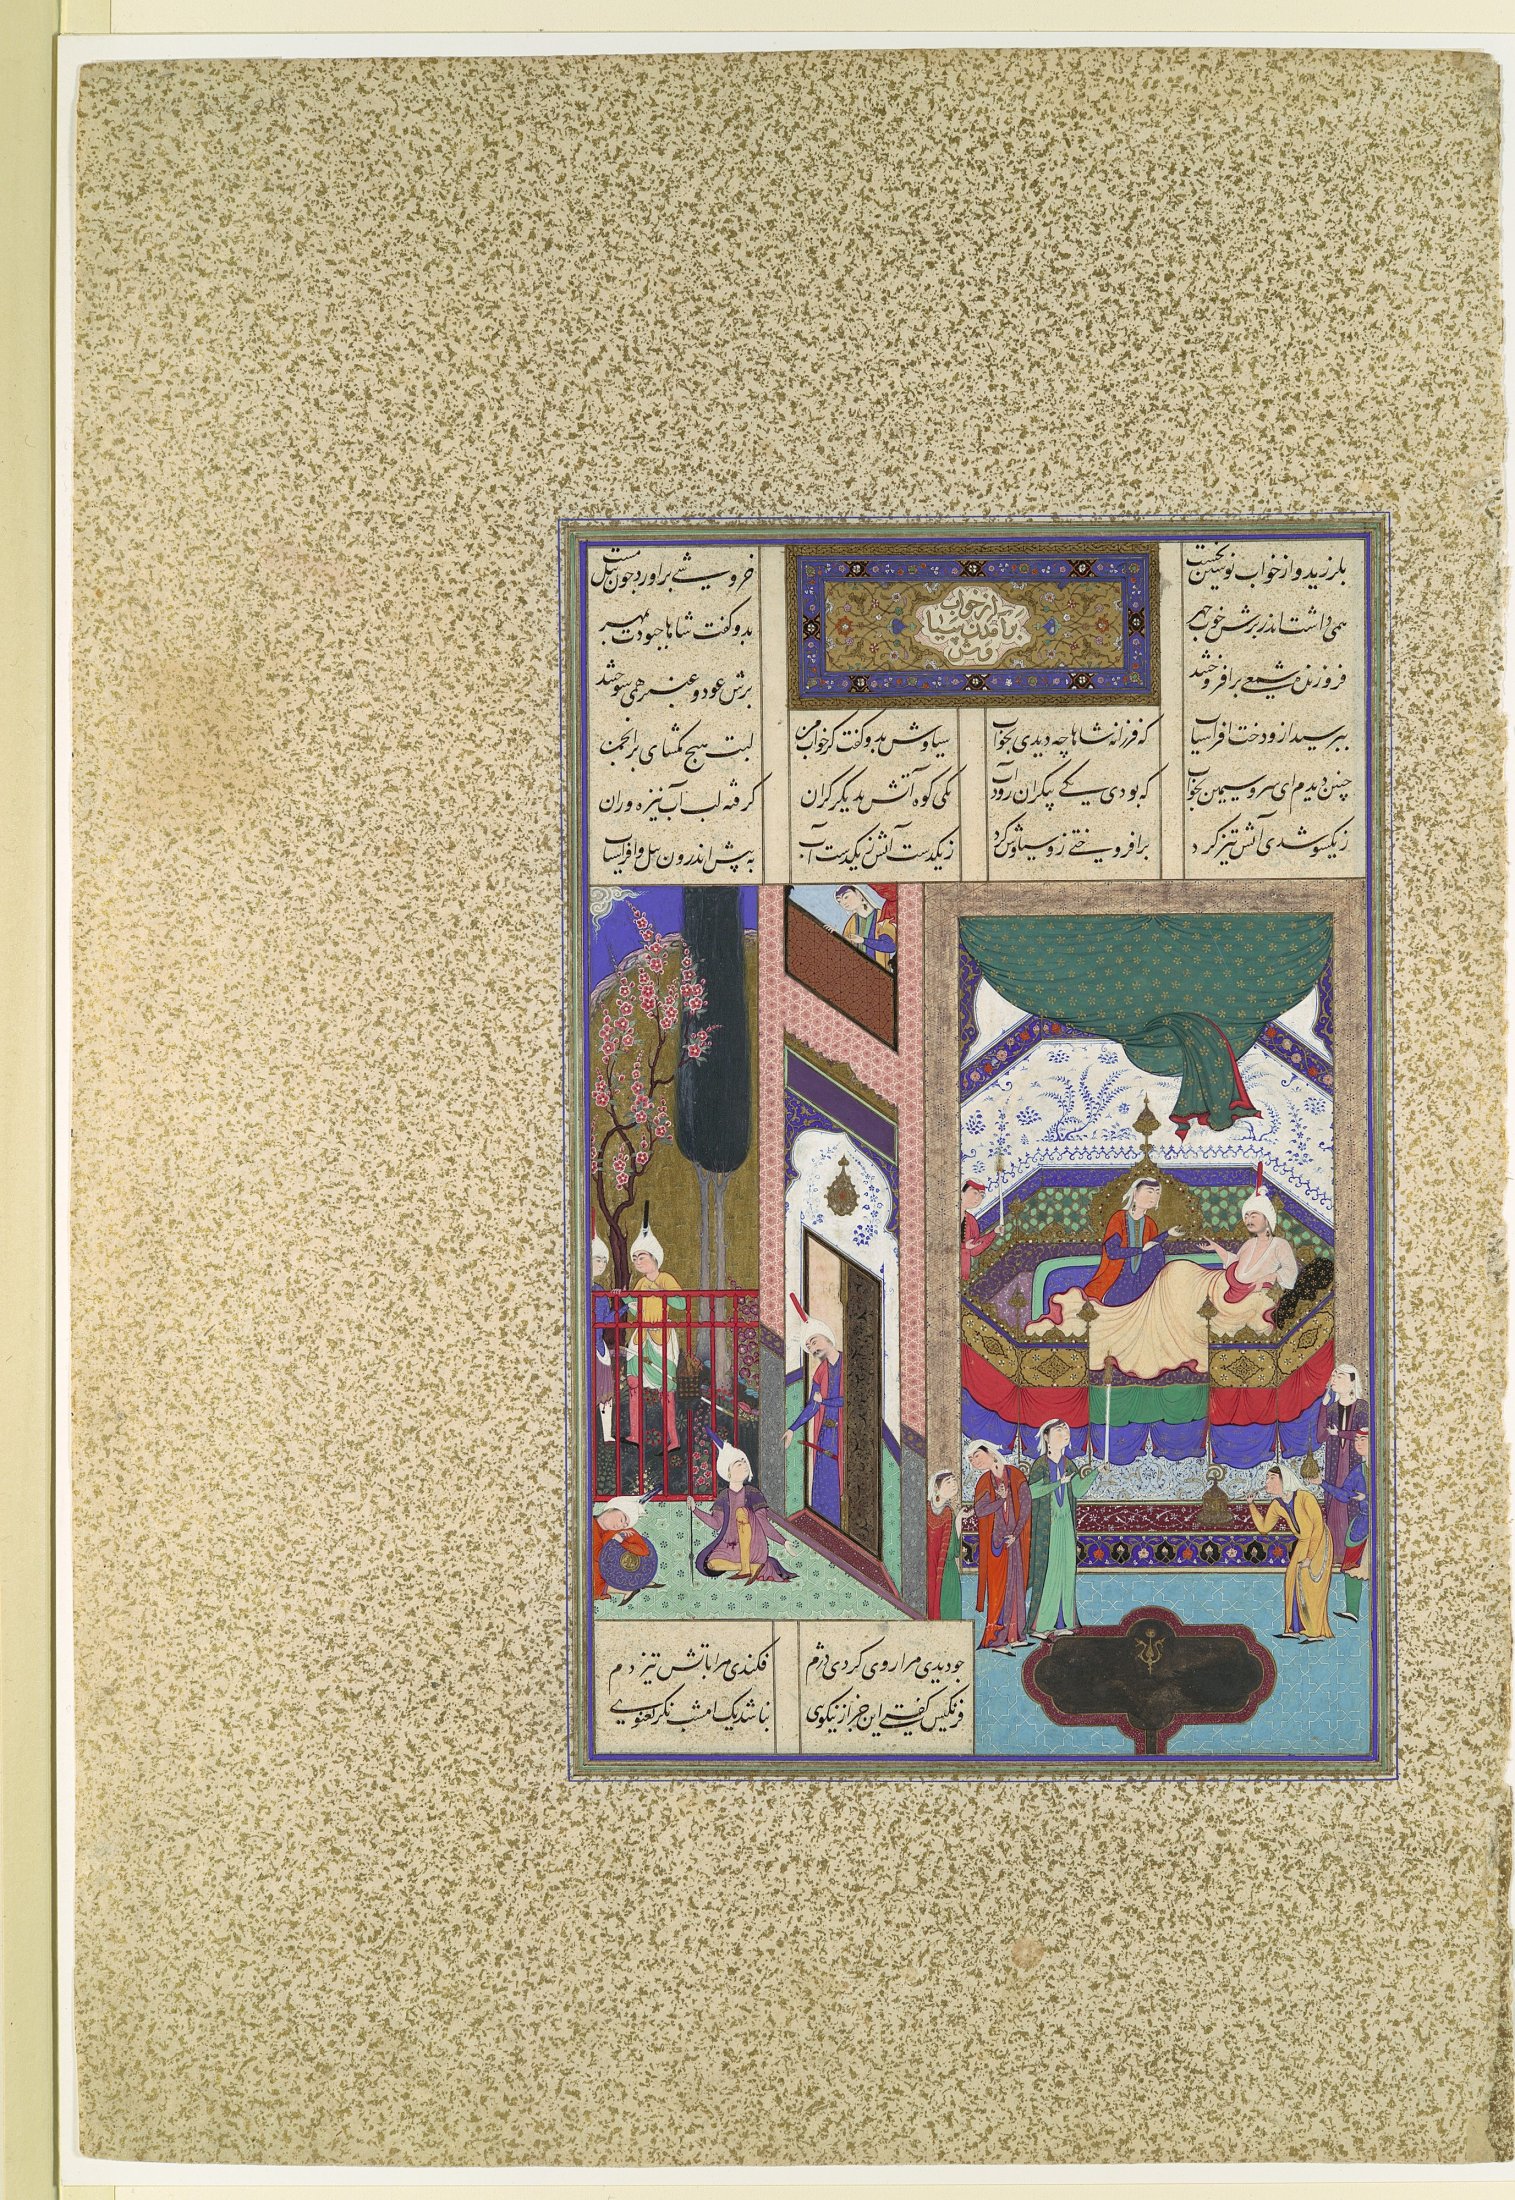  Firdausi\'s Parable Of The Ship Of Shi\'ism , Folio 18v From The Shahnama (Book Of Kings) Of Shah Tahmasp MET DP107145